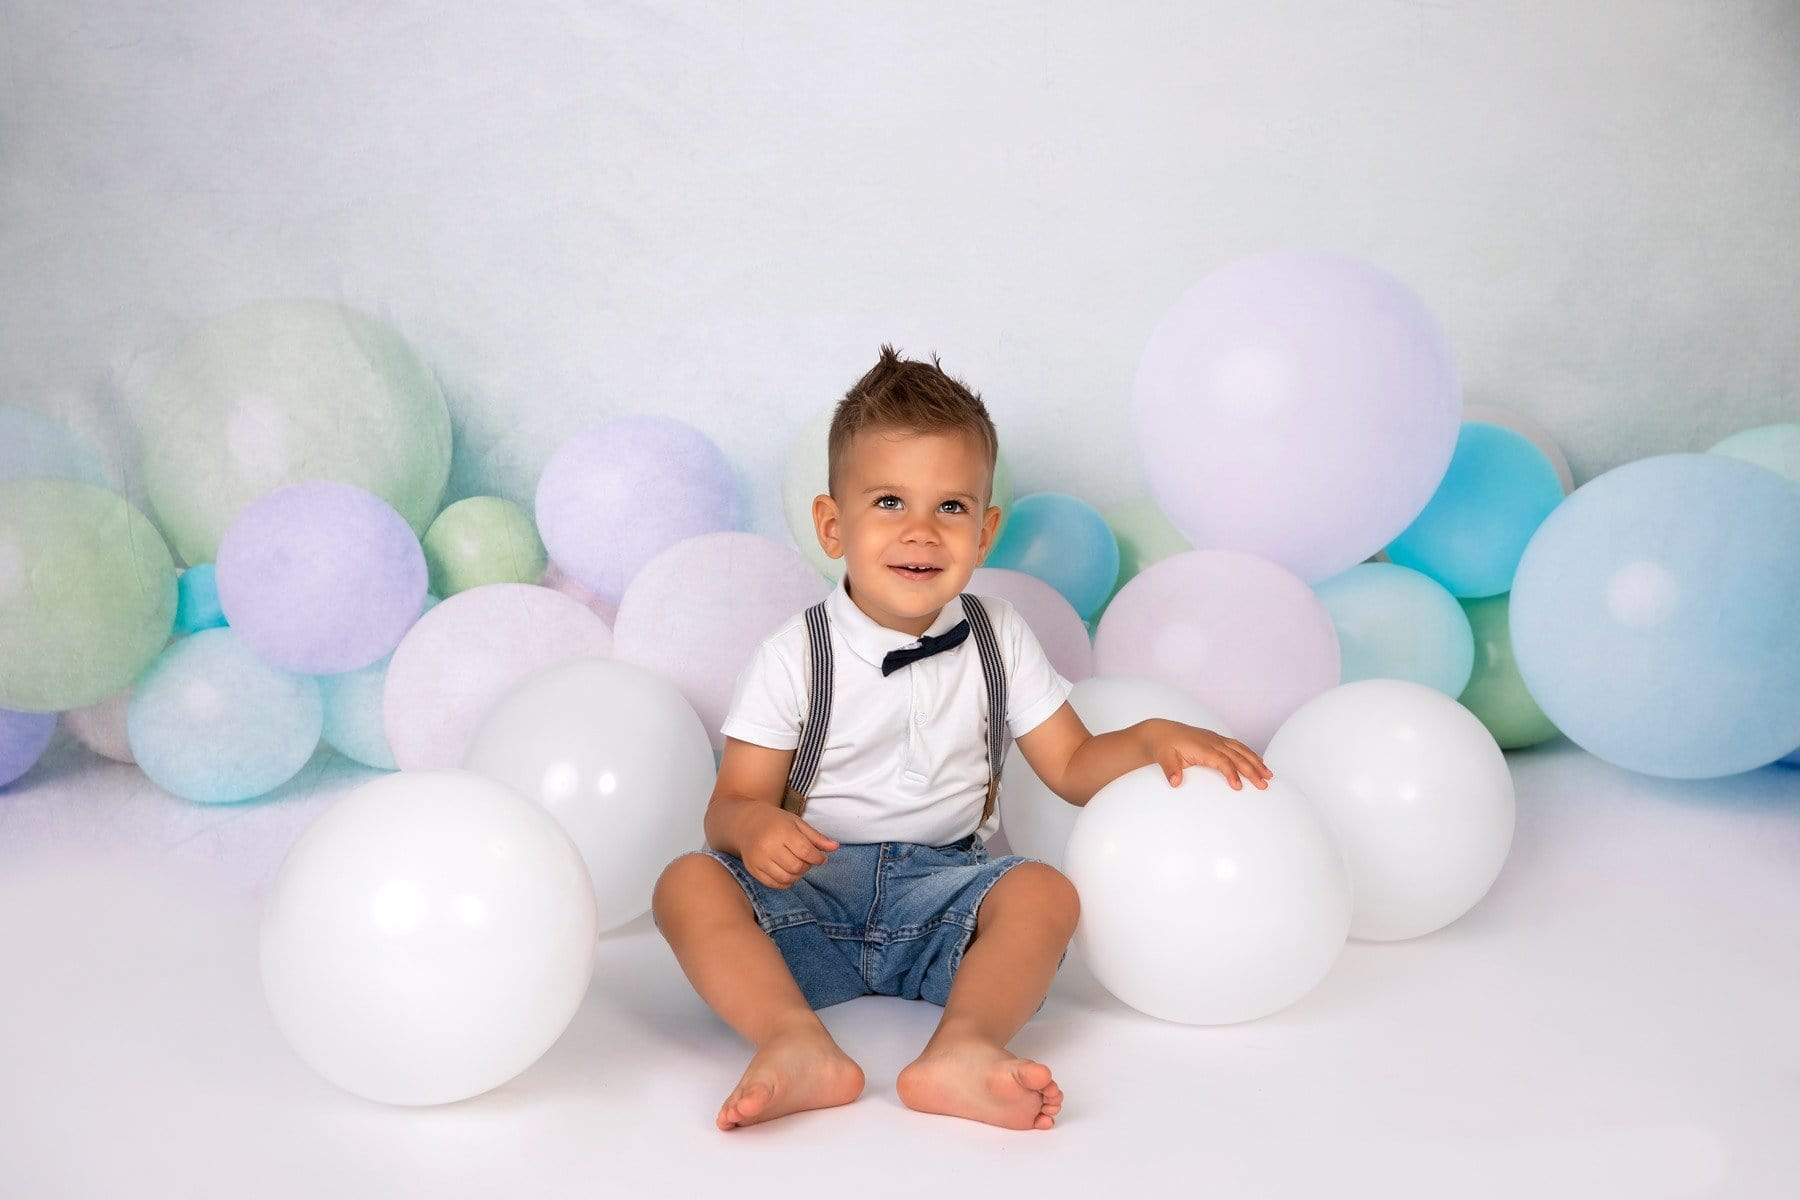 Kate Light Green Balloons for Children Backdrop for Photography Designed by Kerry Anderson